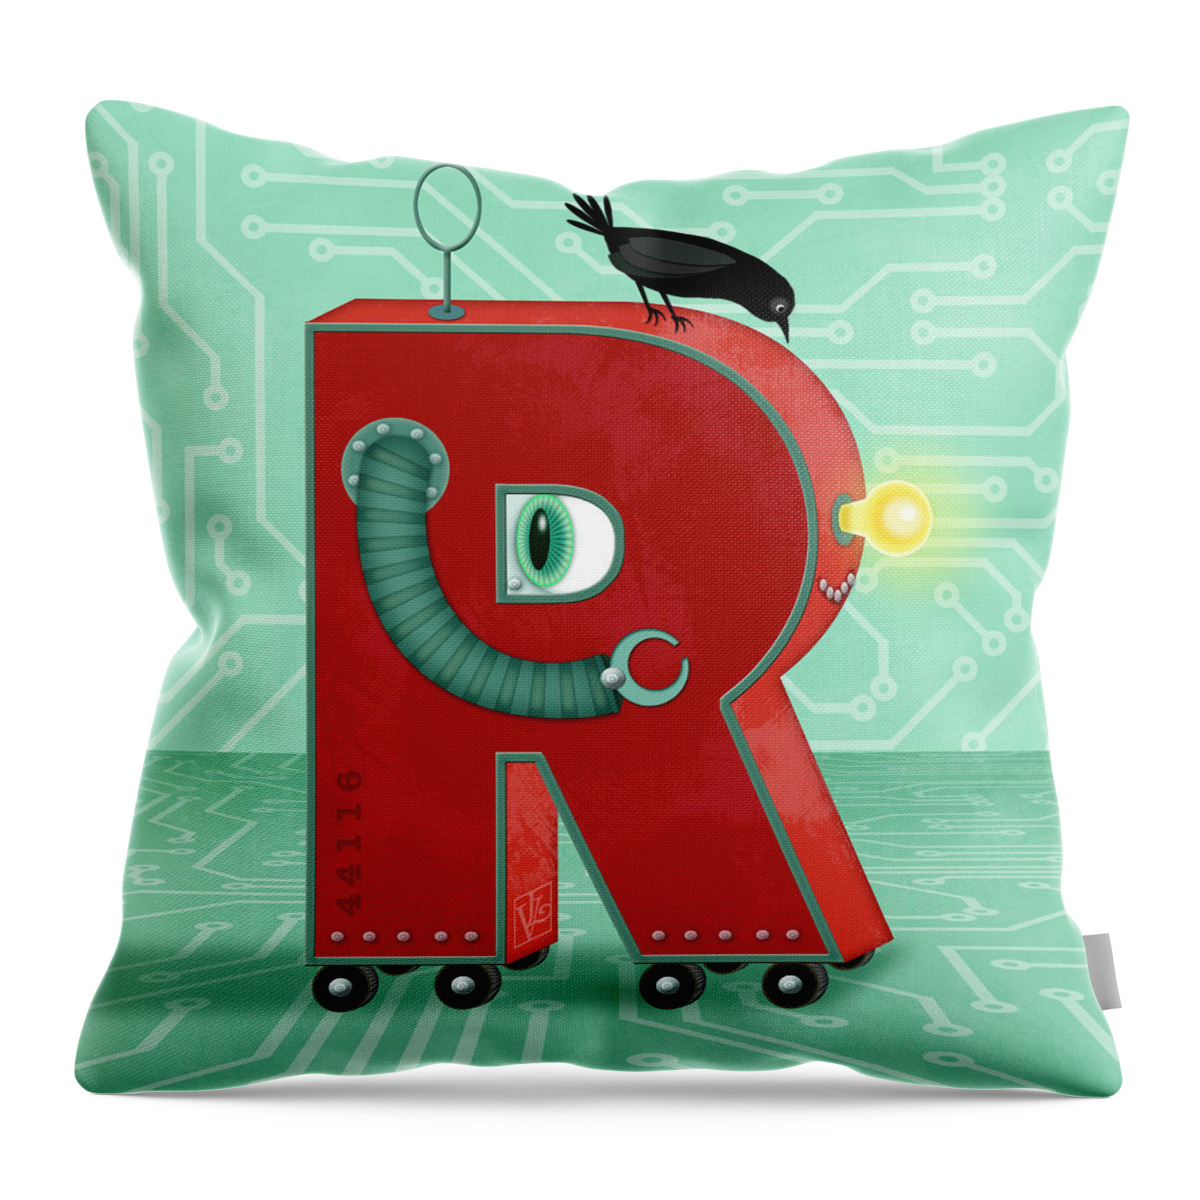 R Is For Robot Throw Pillow featuring the digital art R is for Robot by Valerie Drake Lesiak